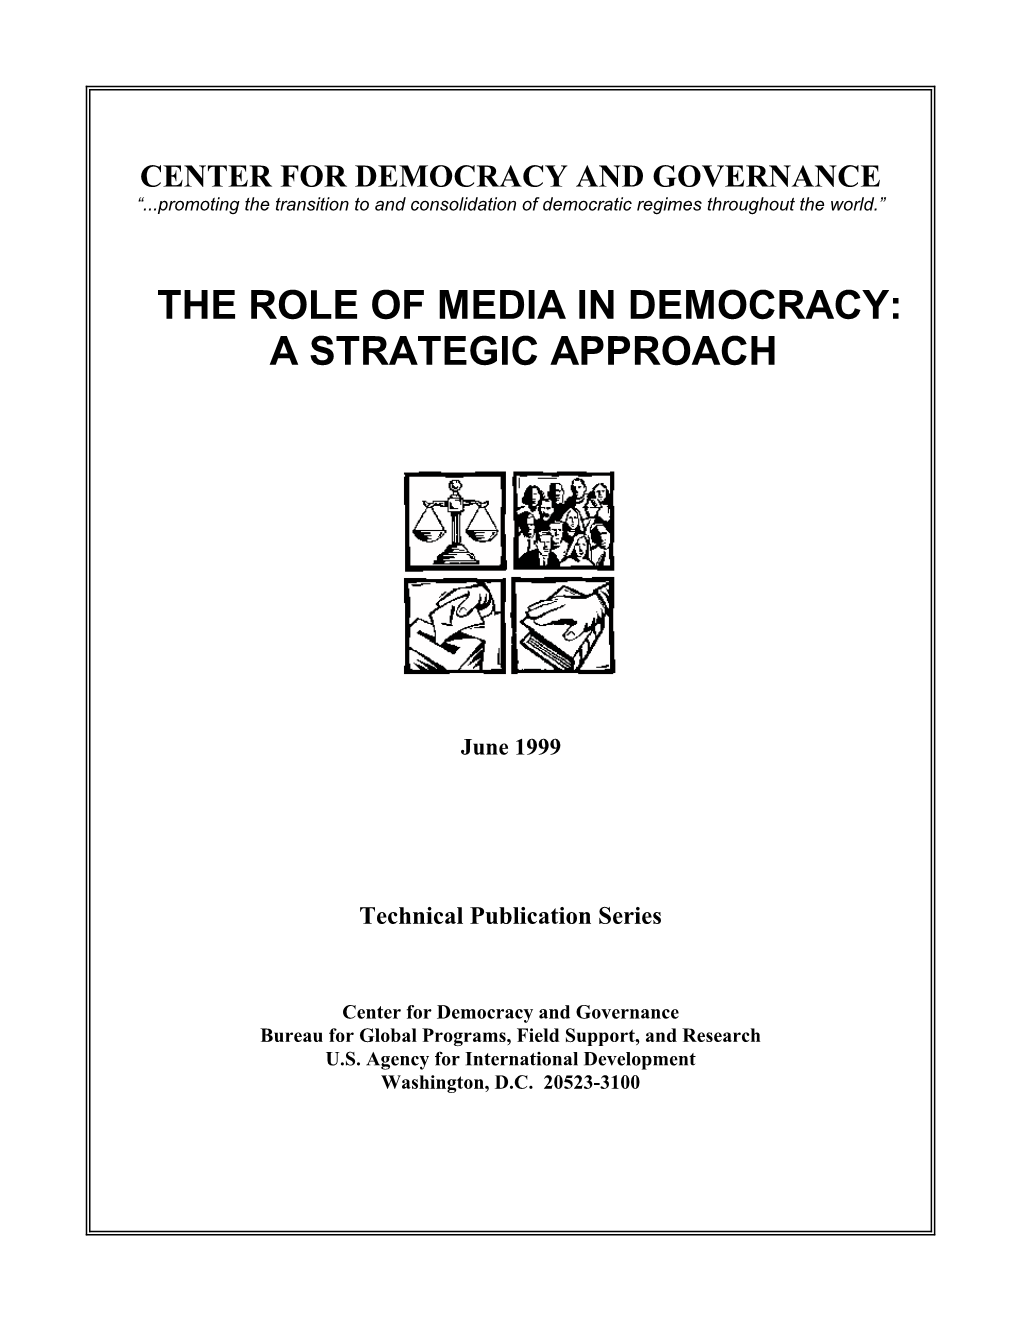 The Role of Media in Democracy: a Strategic Approach